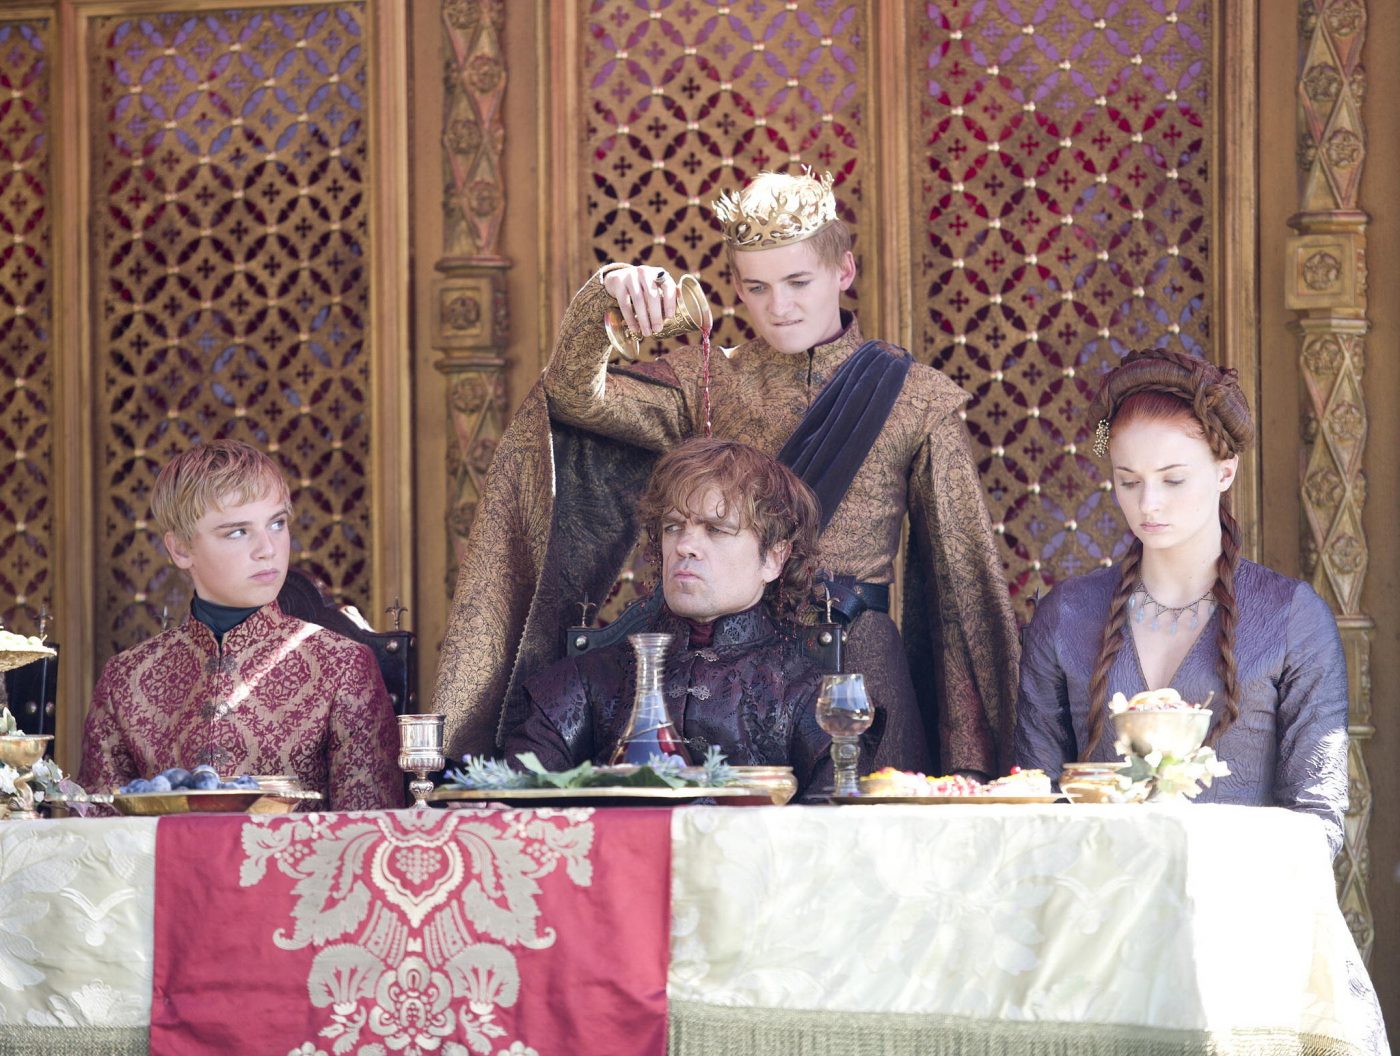 Whodunnit? Game of Thrones Season 4, Episode 2 "The Lion and the Rose" Edition